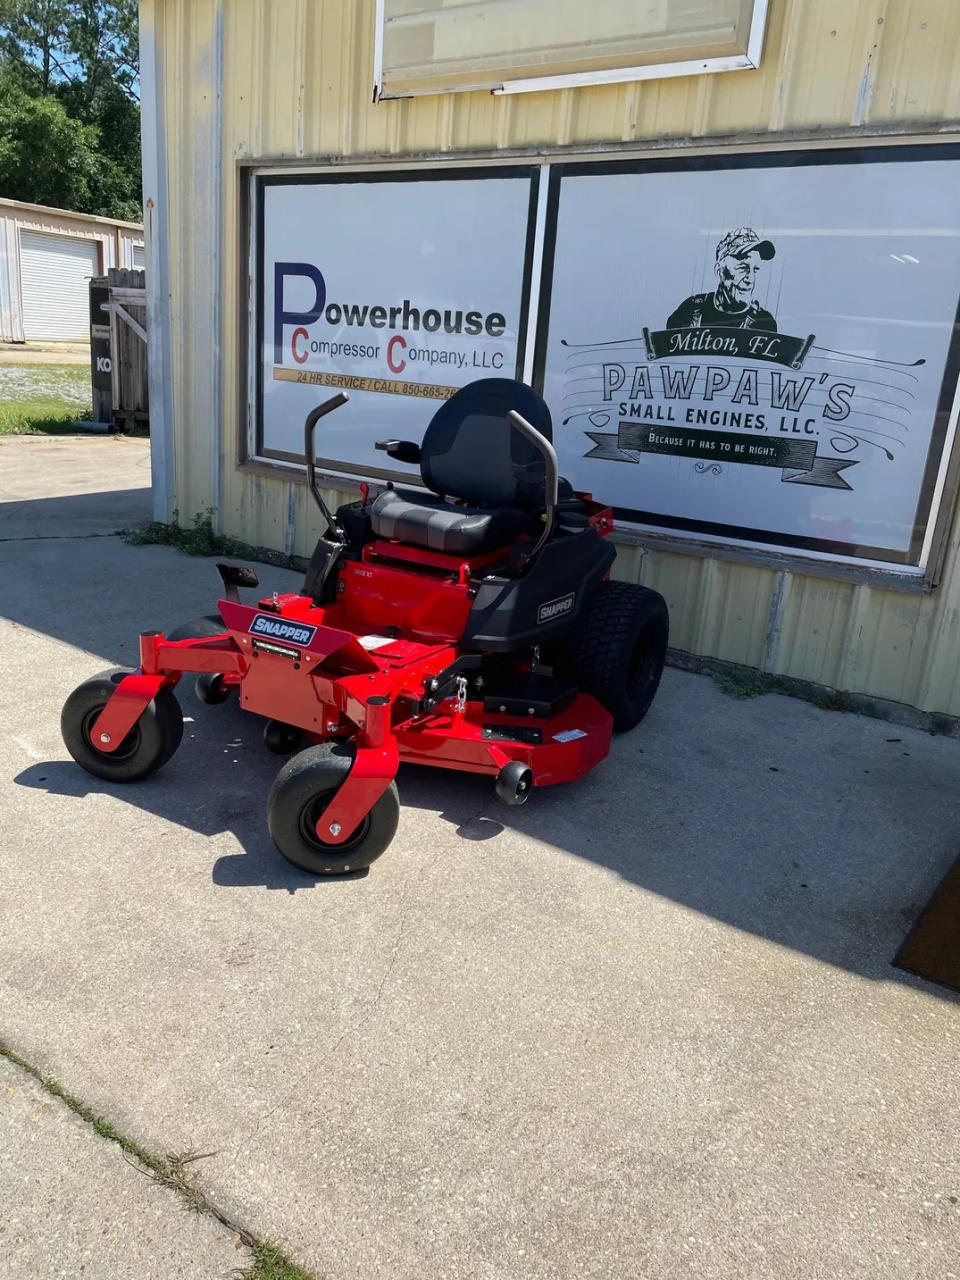 Family-owned business Paw Paw’s Small Engines provides small engine repairs, lawn equipment and used parts at 4912 Glover Lane in Milton.